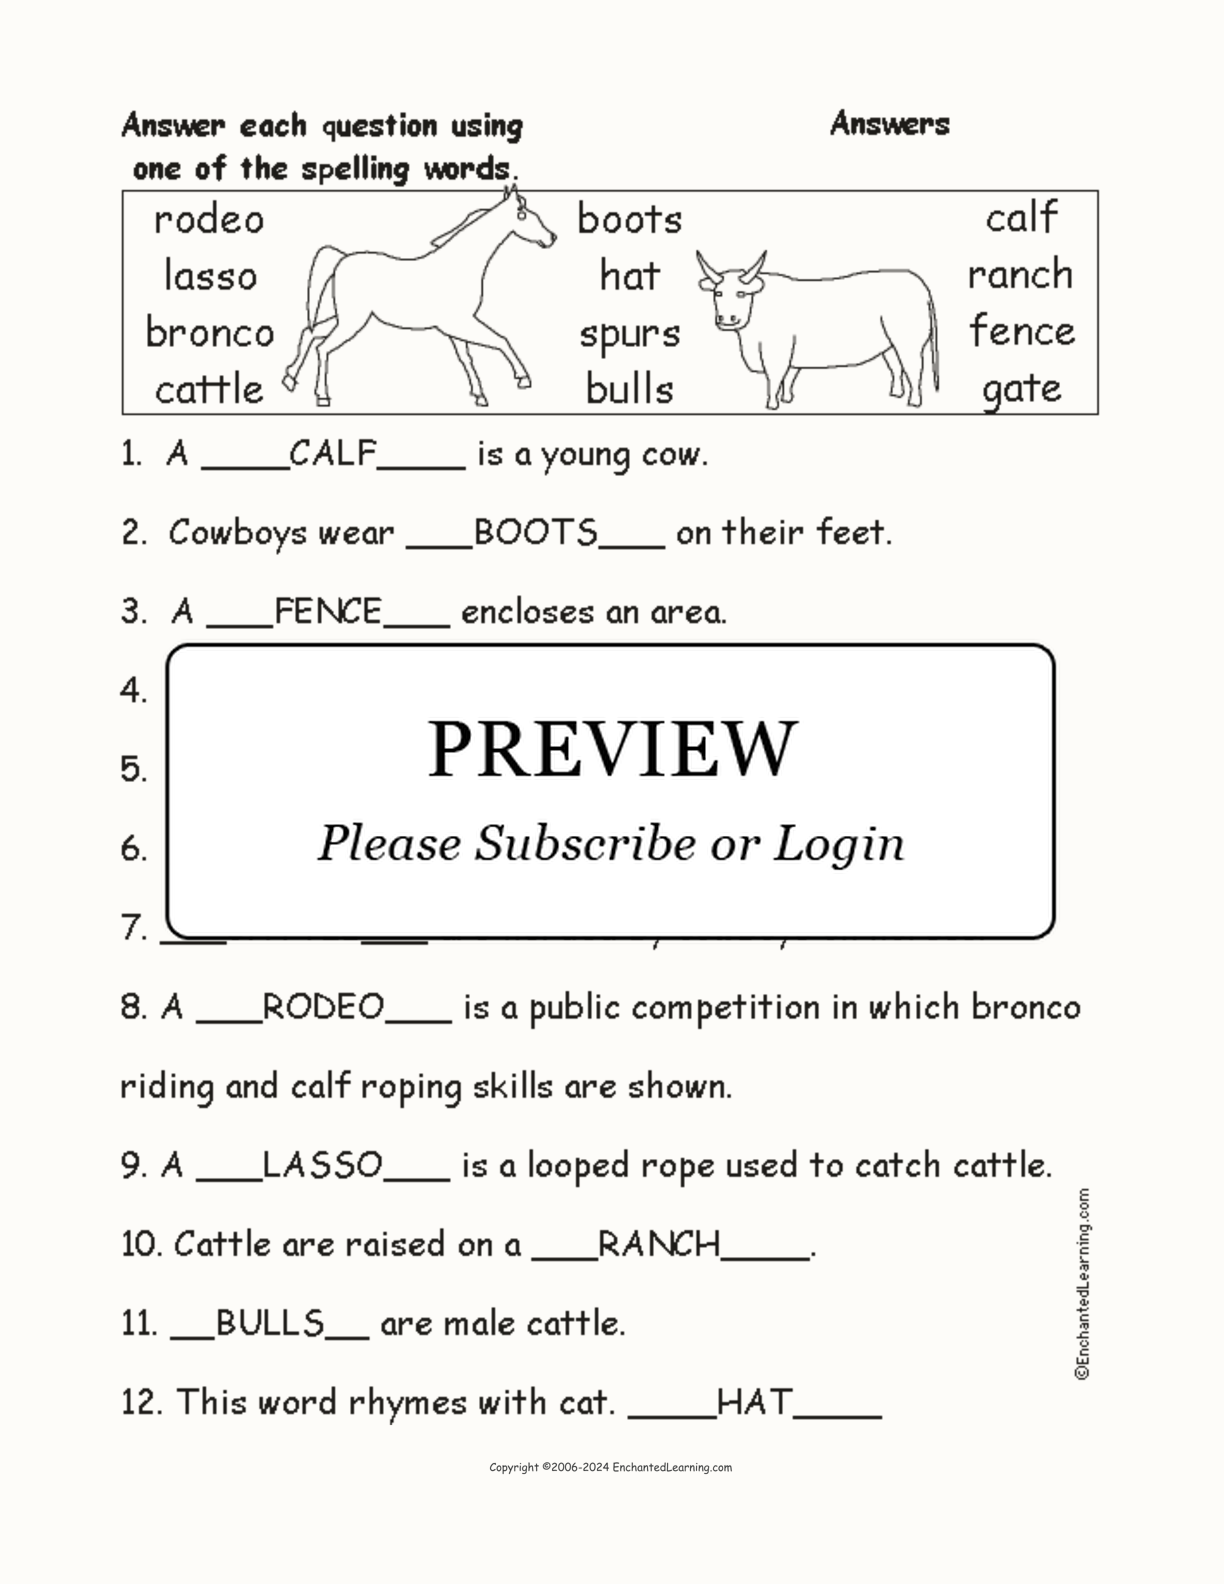 Rodeo Spelling Word Questions interactive worksheet page 2